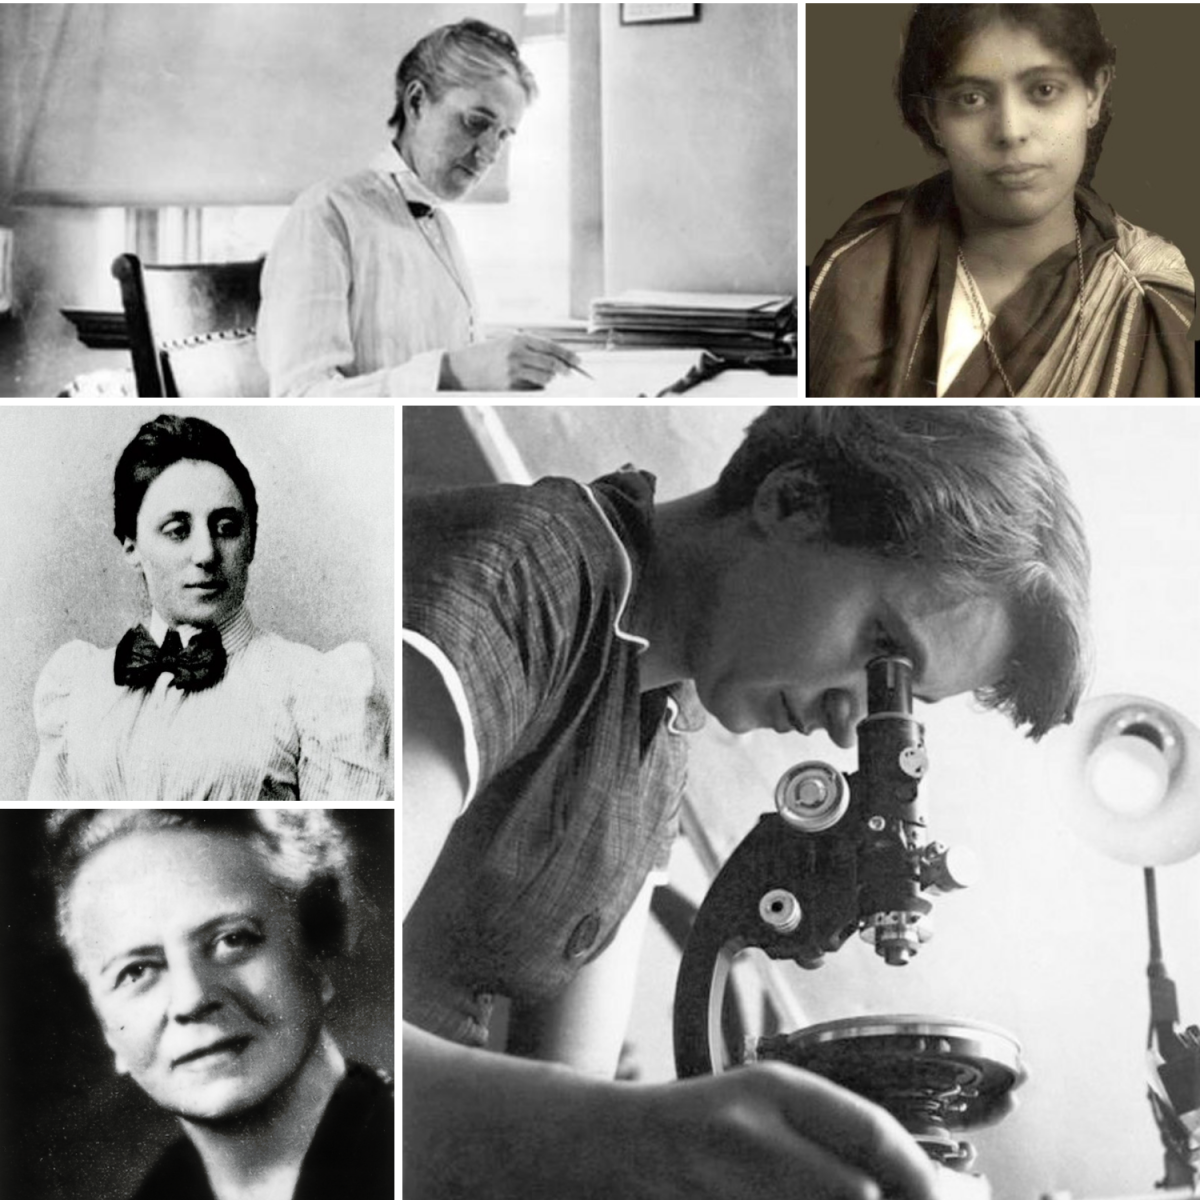 Can You Name 5 Women Scientists?